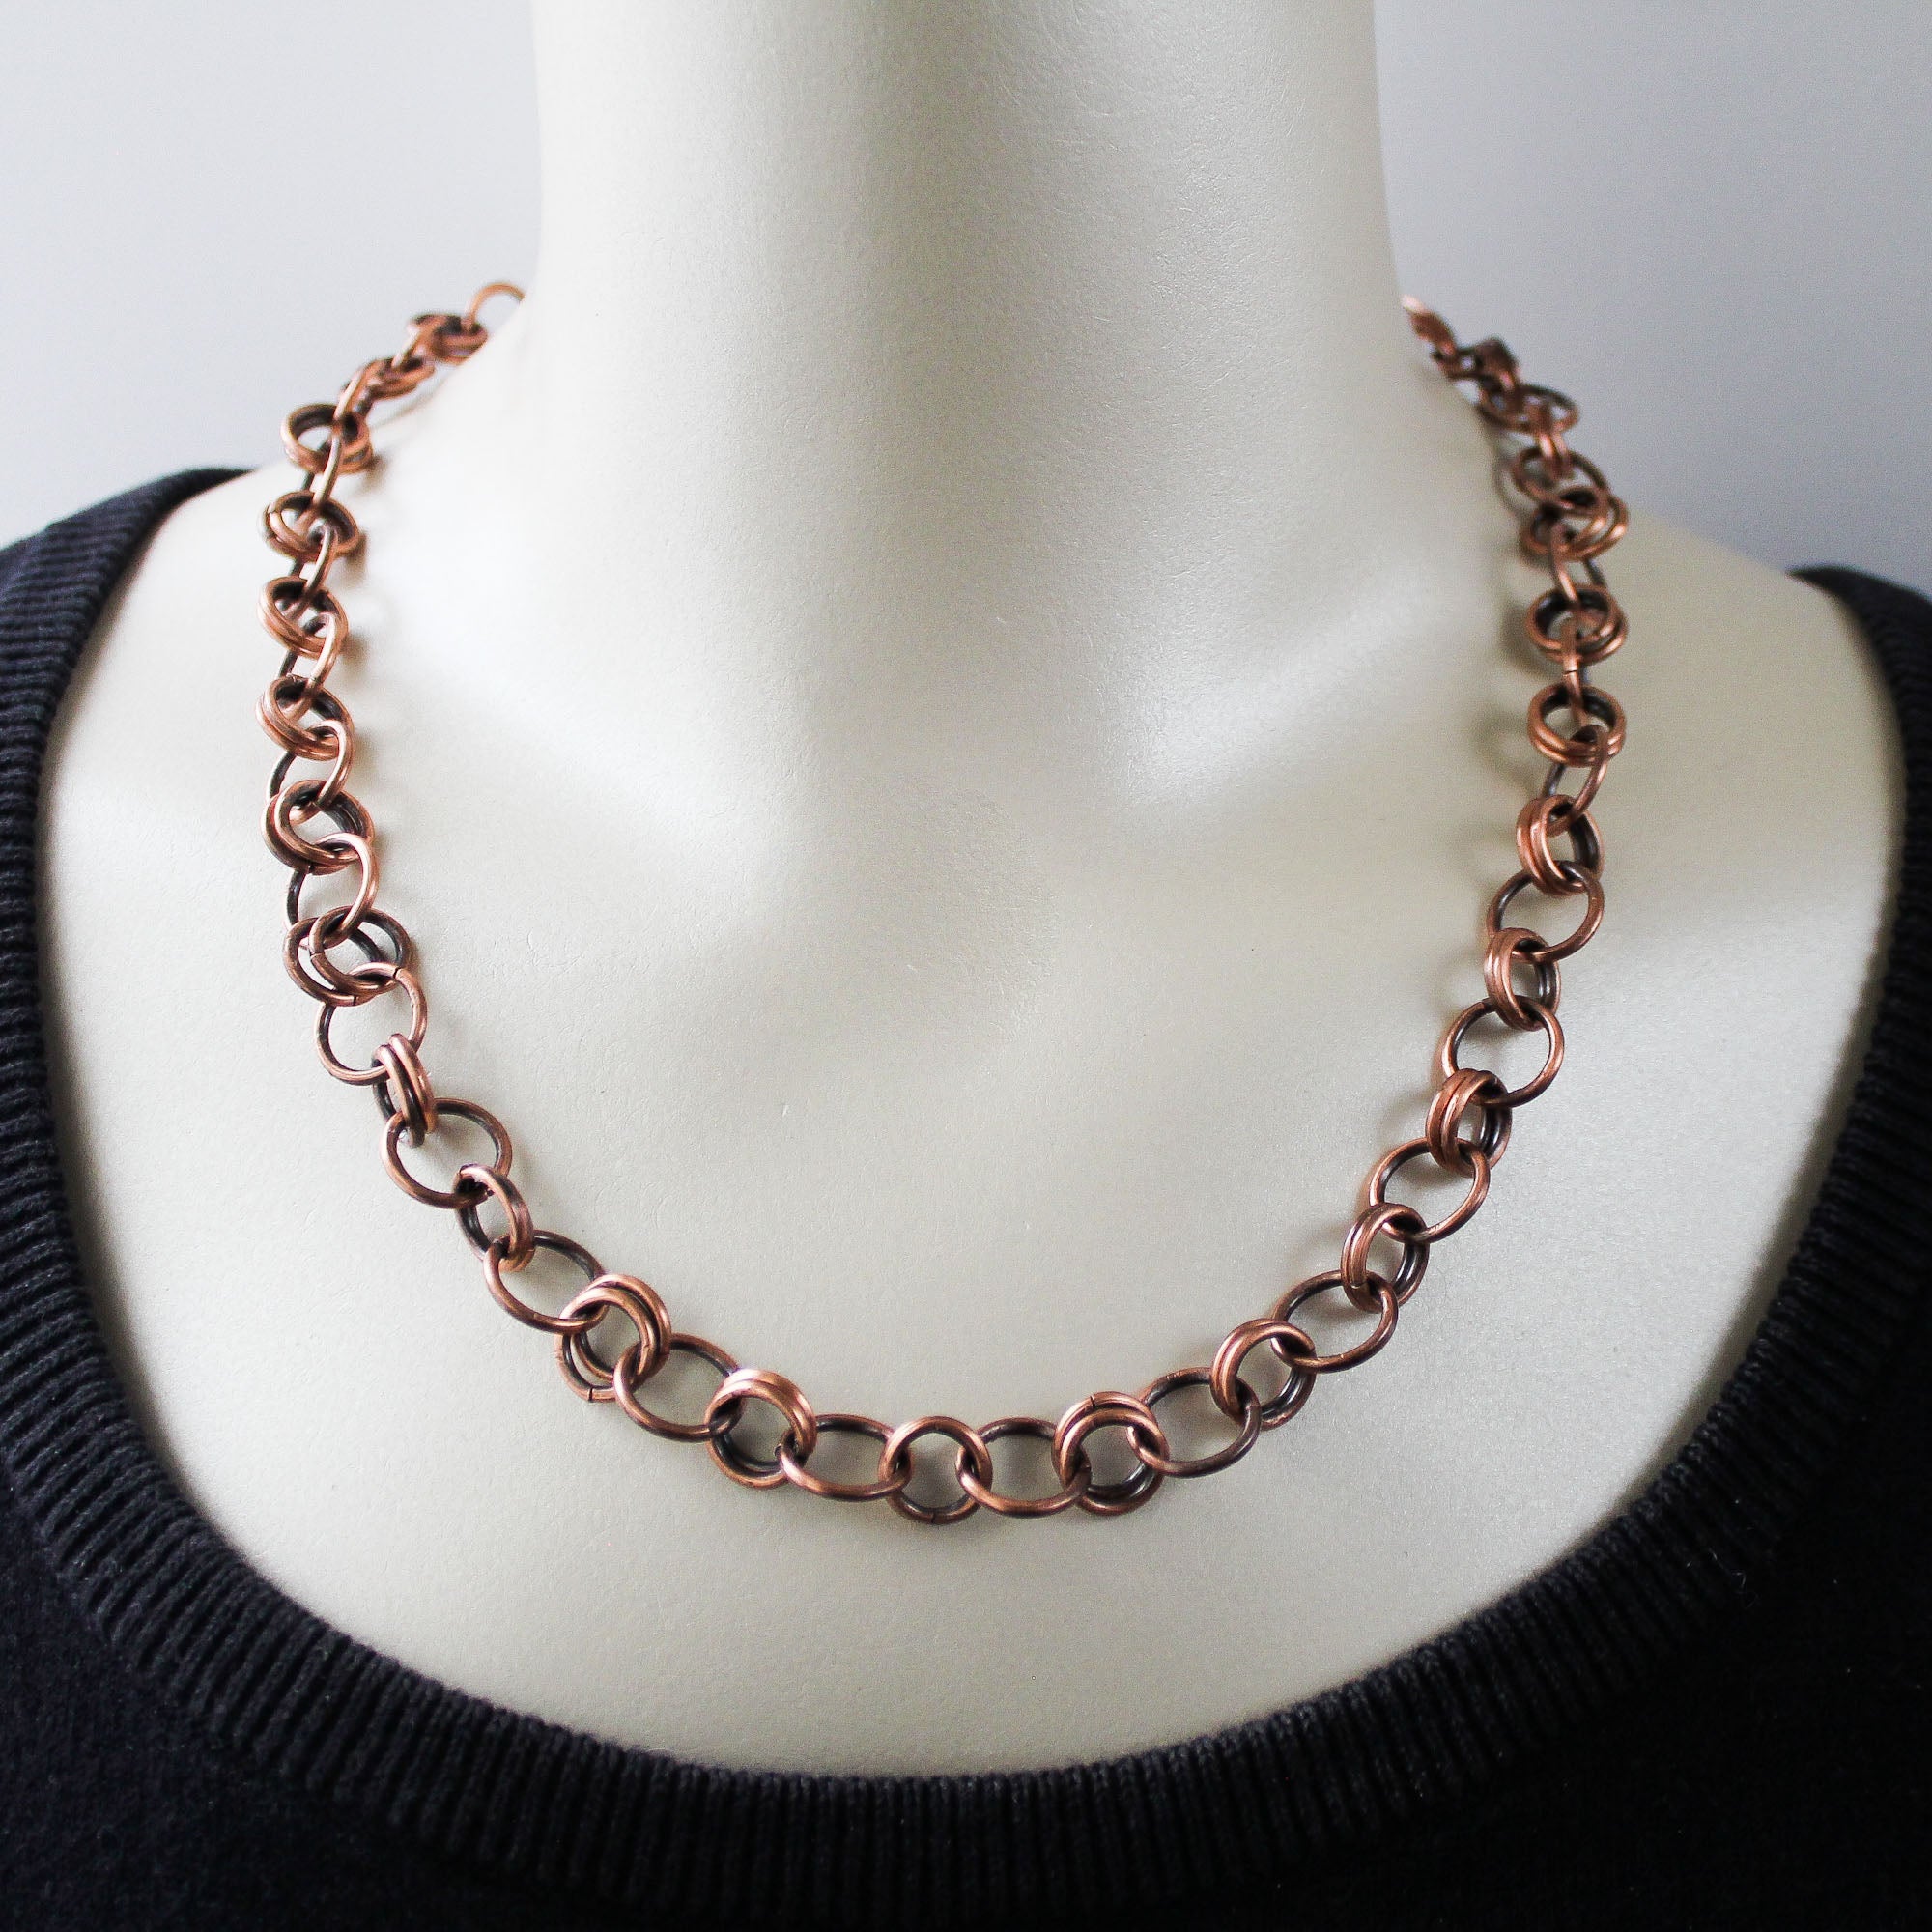 Unisex Chain Maille Copper Necklace  - Adjustable